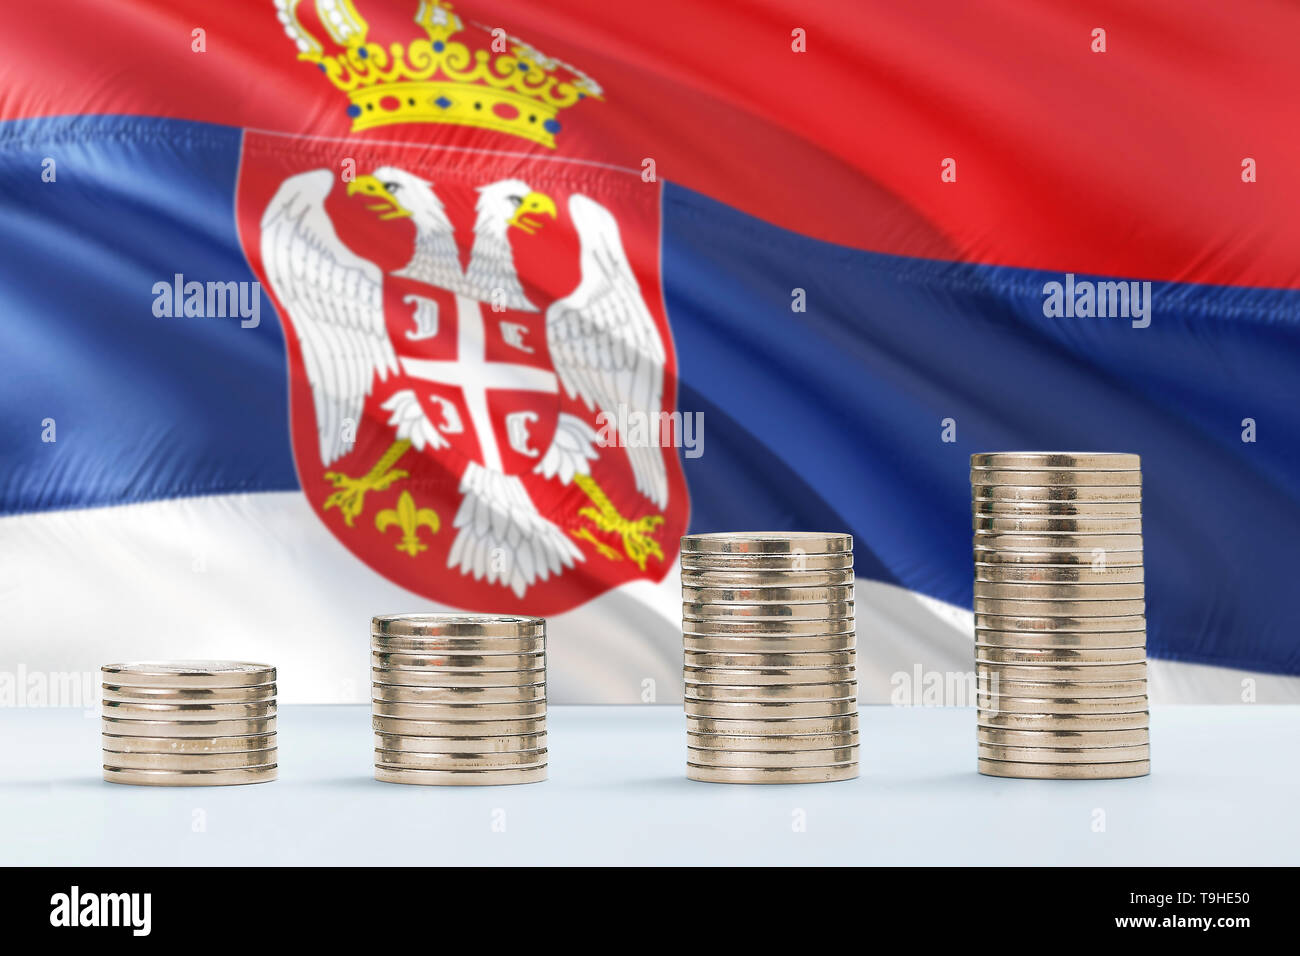 Serbia flag waving in the background with rows of coins for finance and business concept. Saving money. Stock Photo